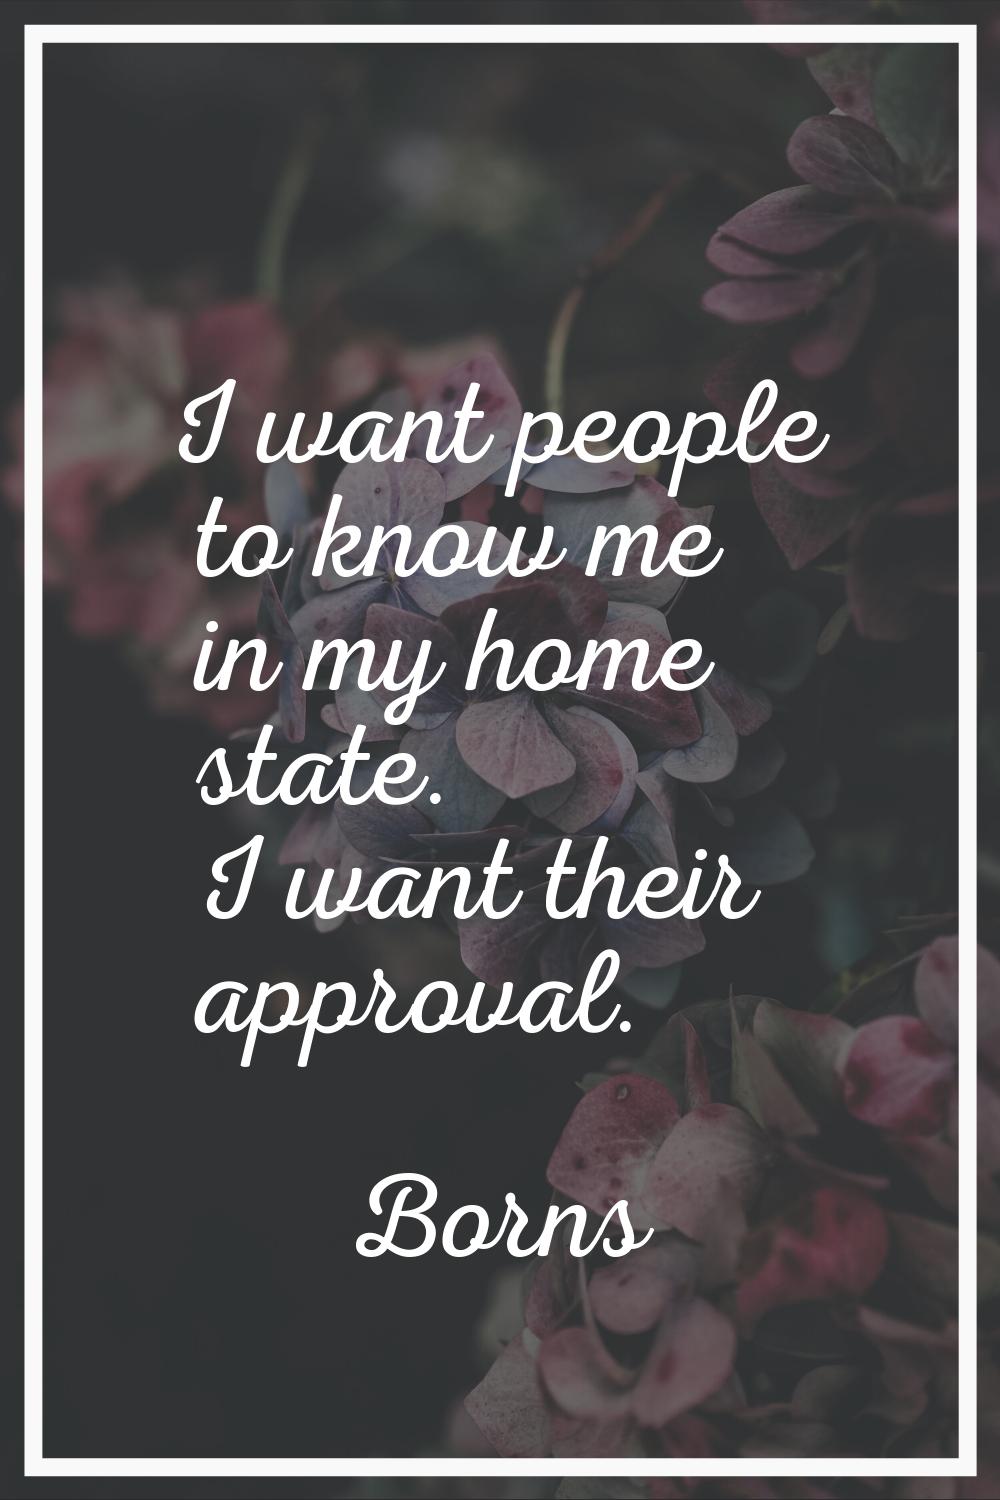 I want people to know me in my home state. I want their approval.